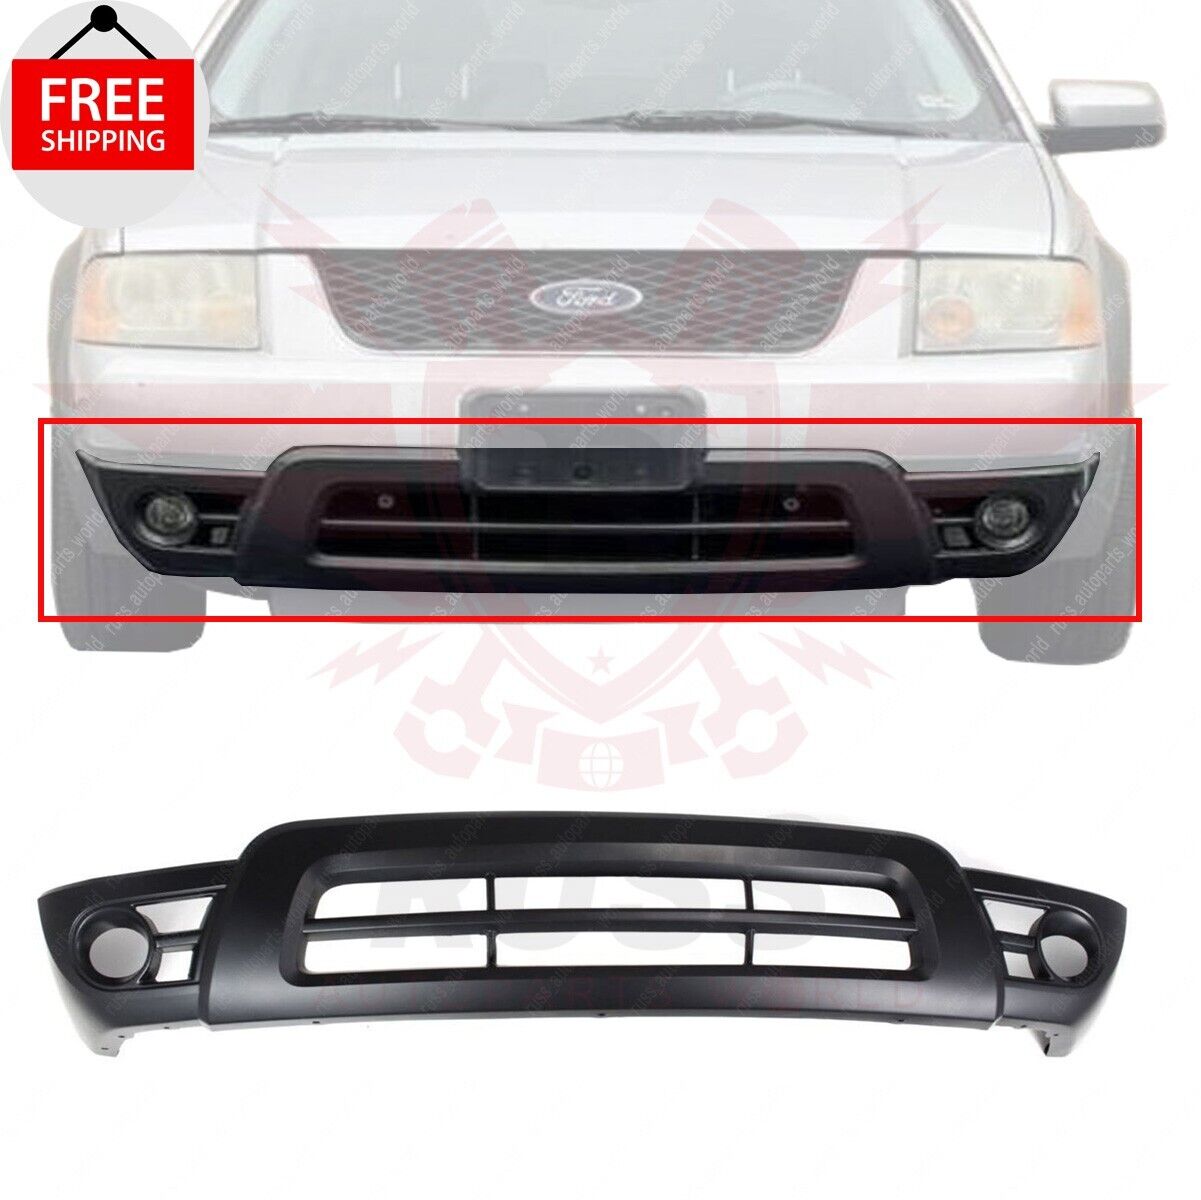 New Front Lower Bumper Cover Primed Paints to Match Fits 2005-07 Ford Freestyle